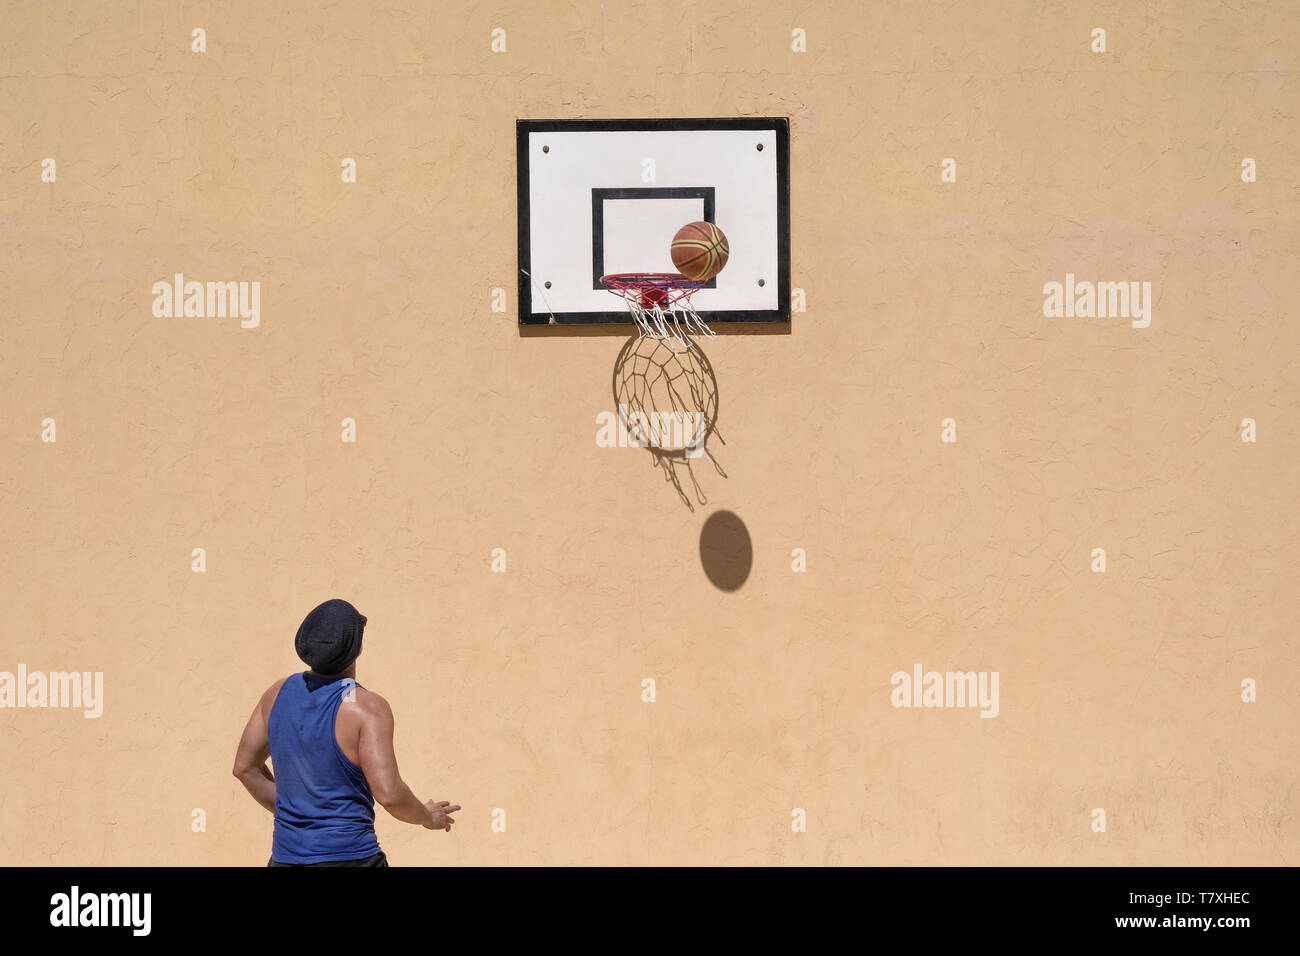 one man is playing basketball on his own in bright sunshine and the basketball creates a shadow on the yellow wall Stock Photo